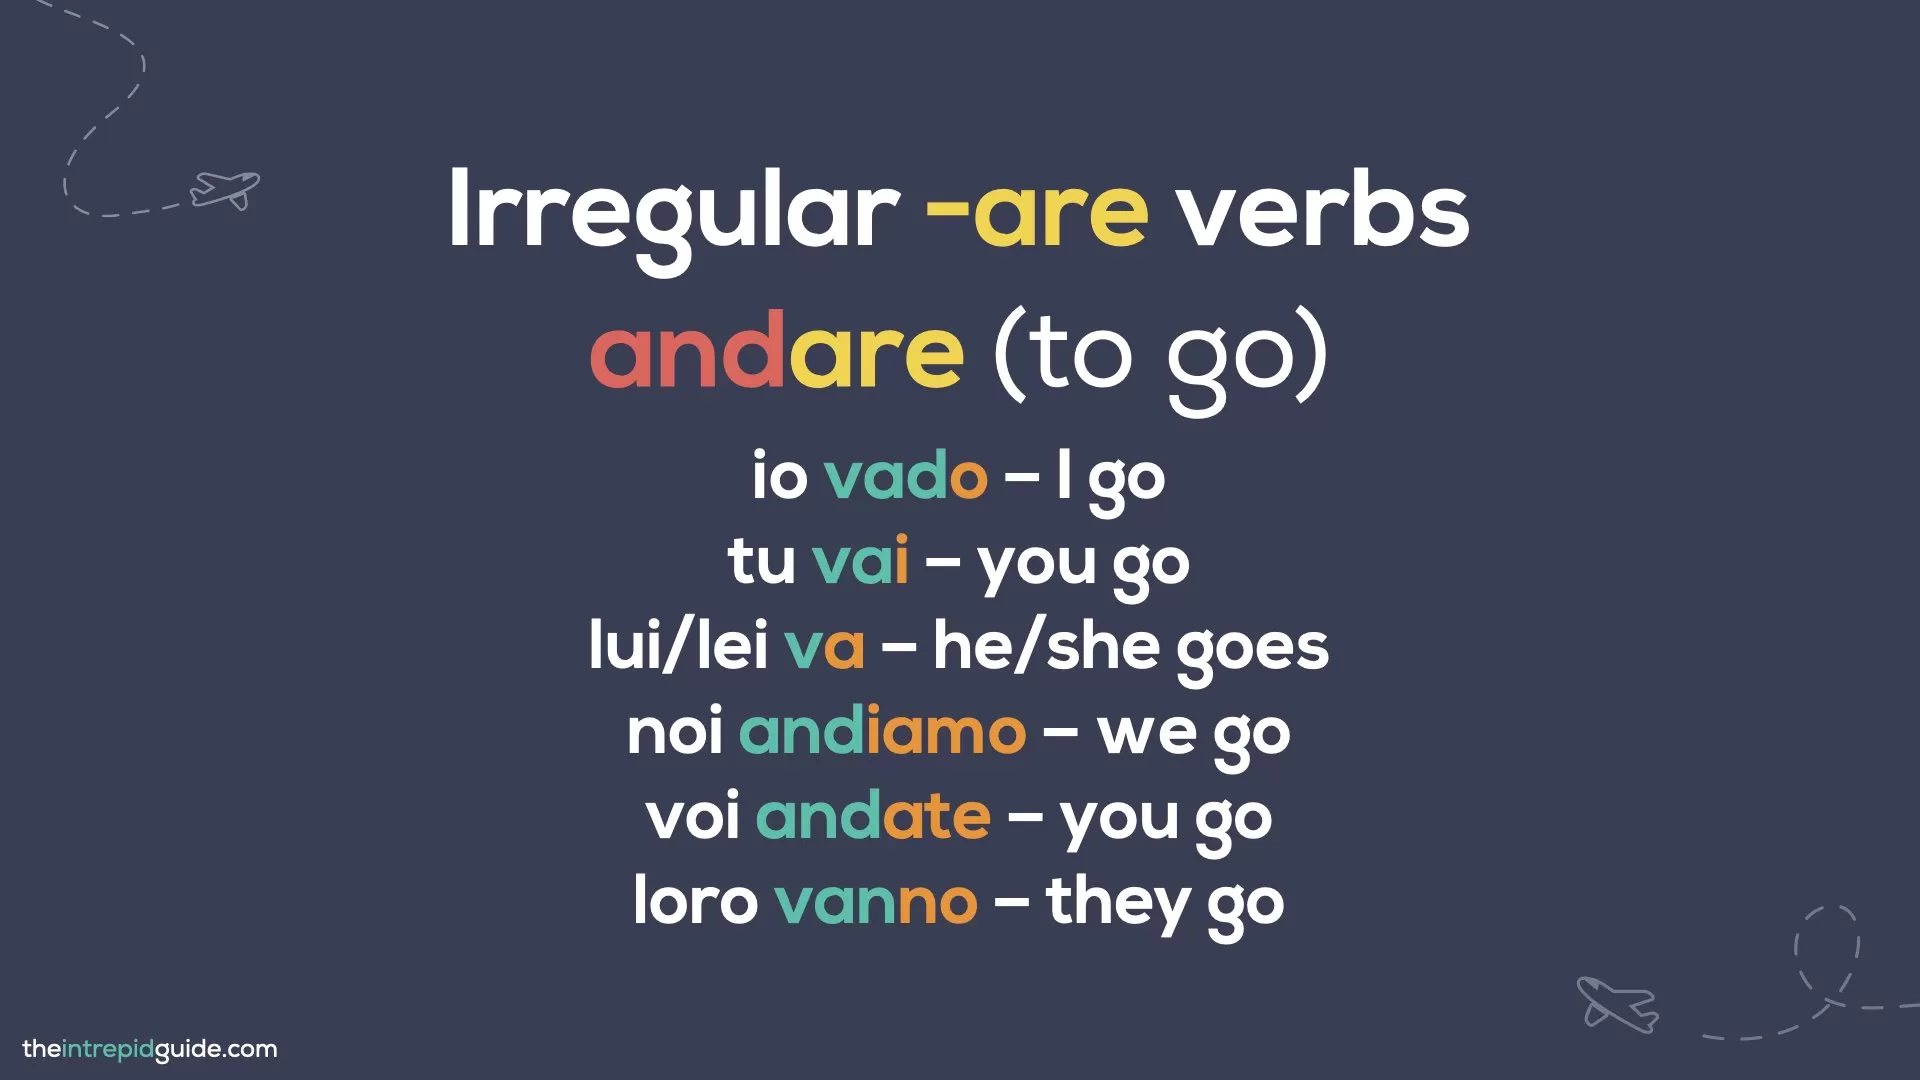 How to Conjugate Italian Verbs - Conjugating the verb andare - to go